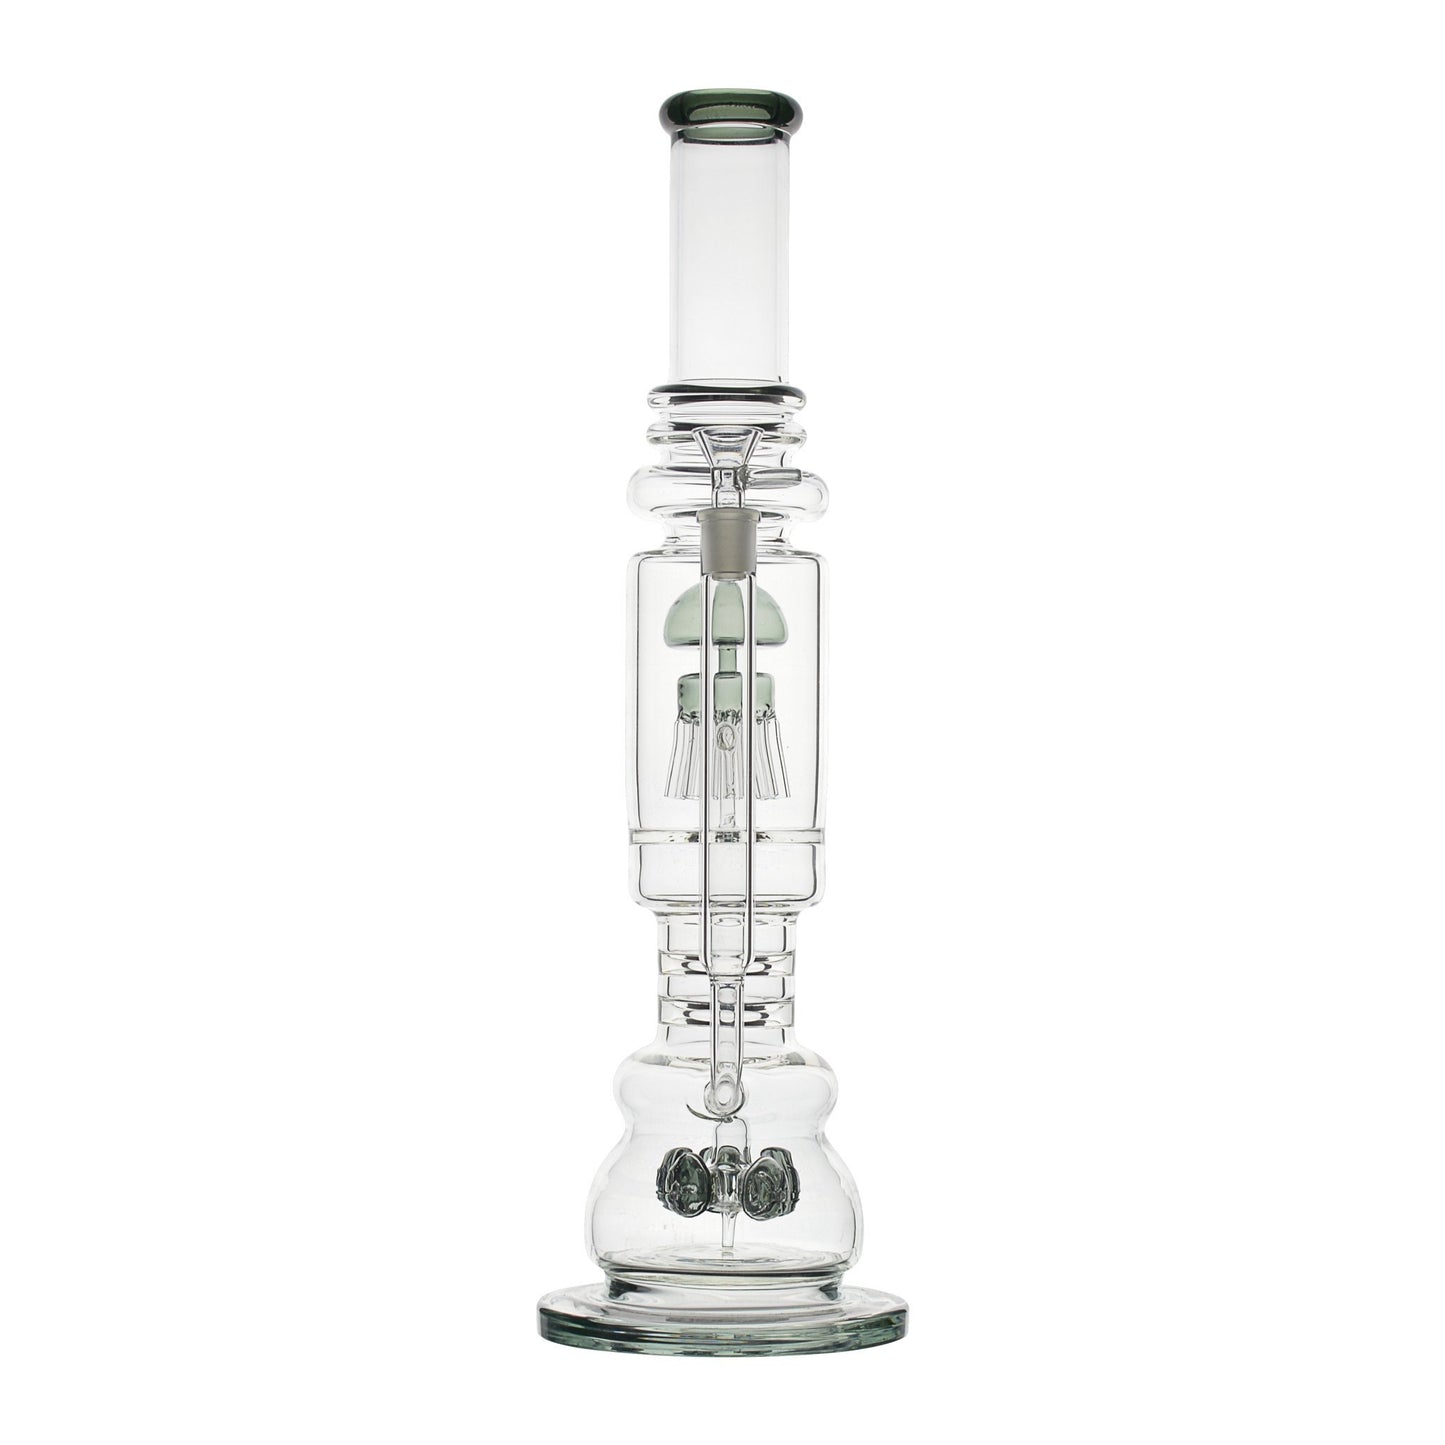 Huge long 18-inch bong beaker style smoking device with jellyfish-looking centerpiece spider design perc